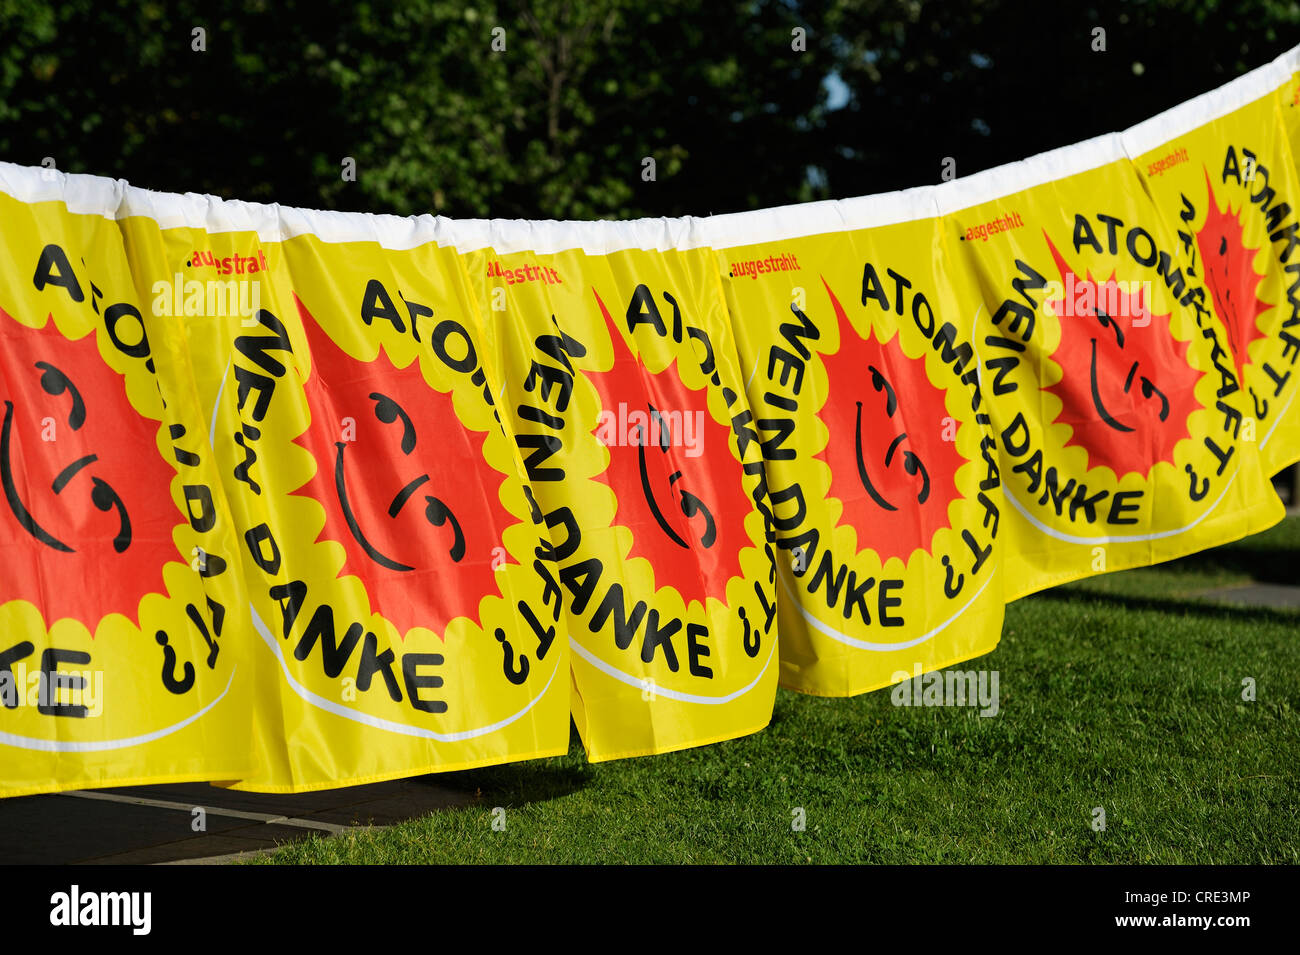 'Atomkraft, nein danke', German for 'nuclear power, no thanks', banners against nuclear power Stock Photo